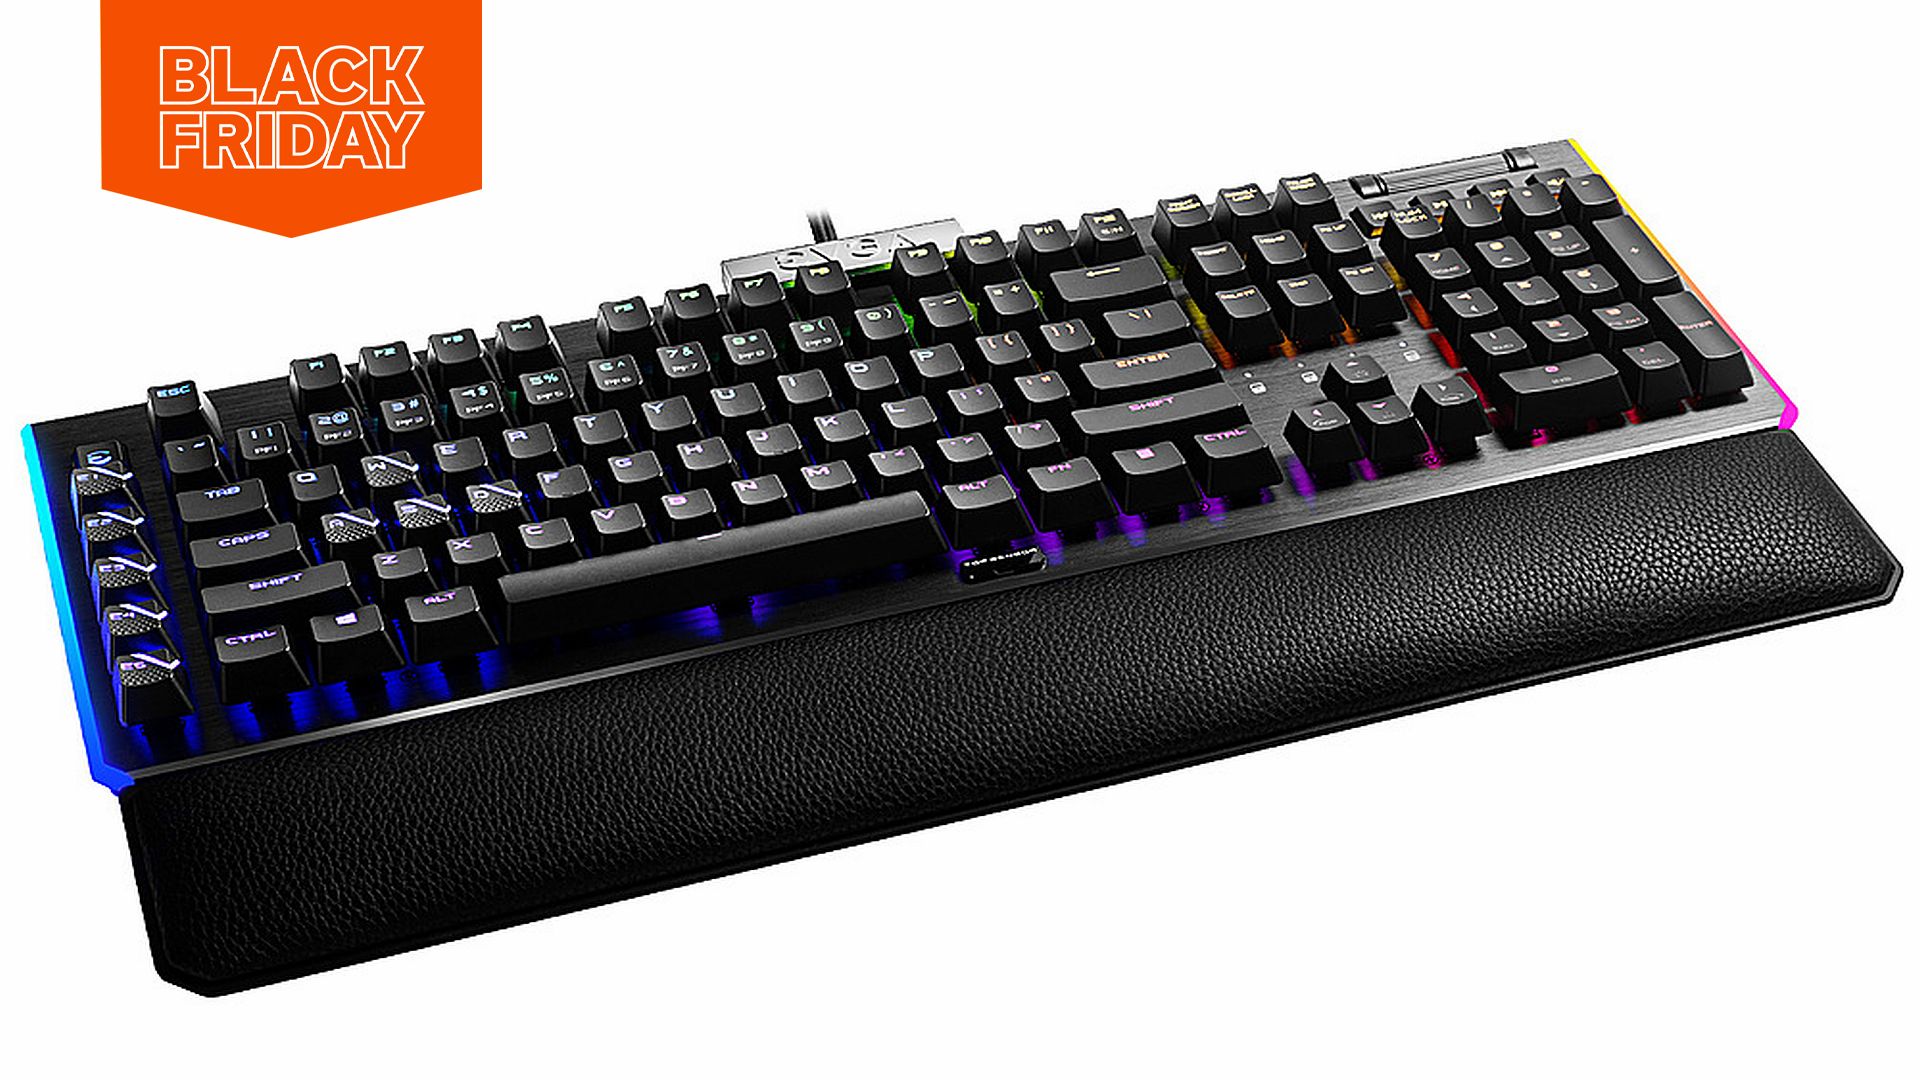 Save $110 on the EVGA Z20 mechanical gaming keyboard this Cyber Monday